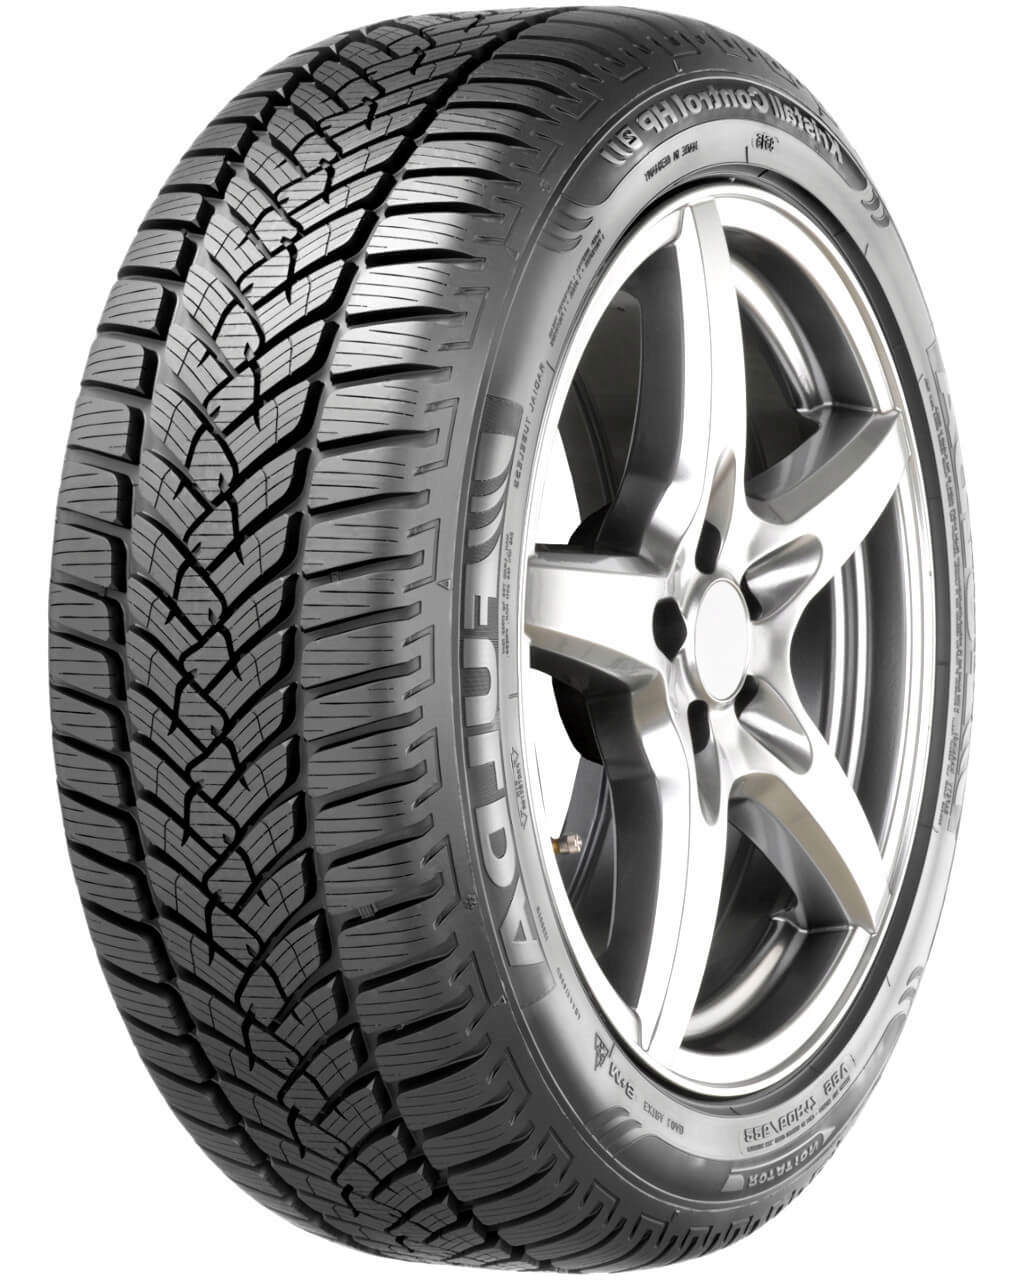 Gomme Nuove Fulda 195/55 R16 87H Kristall Control HP 2 M+S pneumatici nuovi Invernale